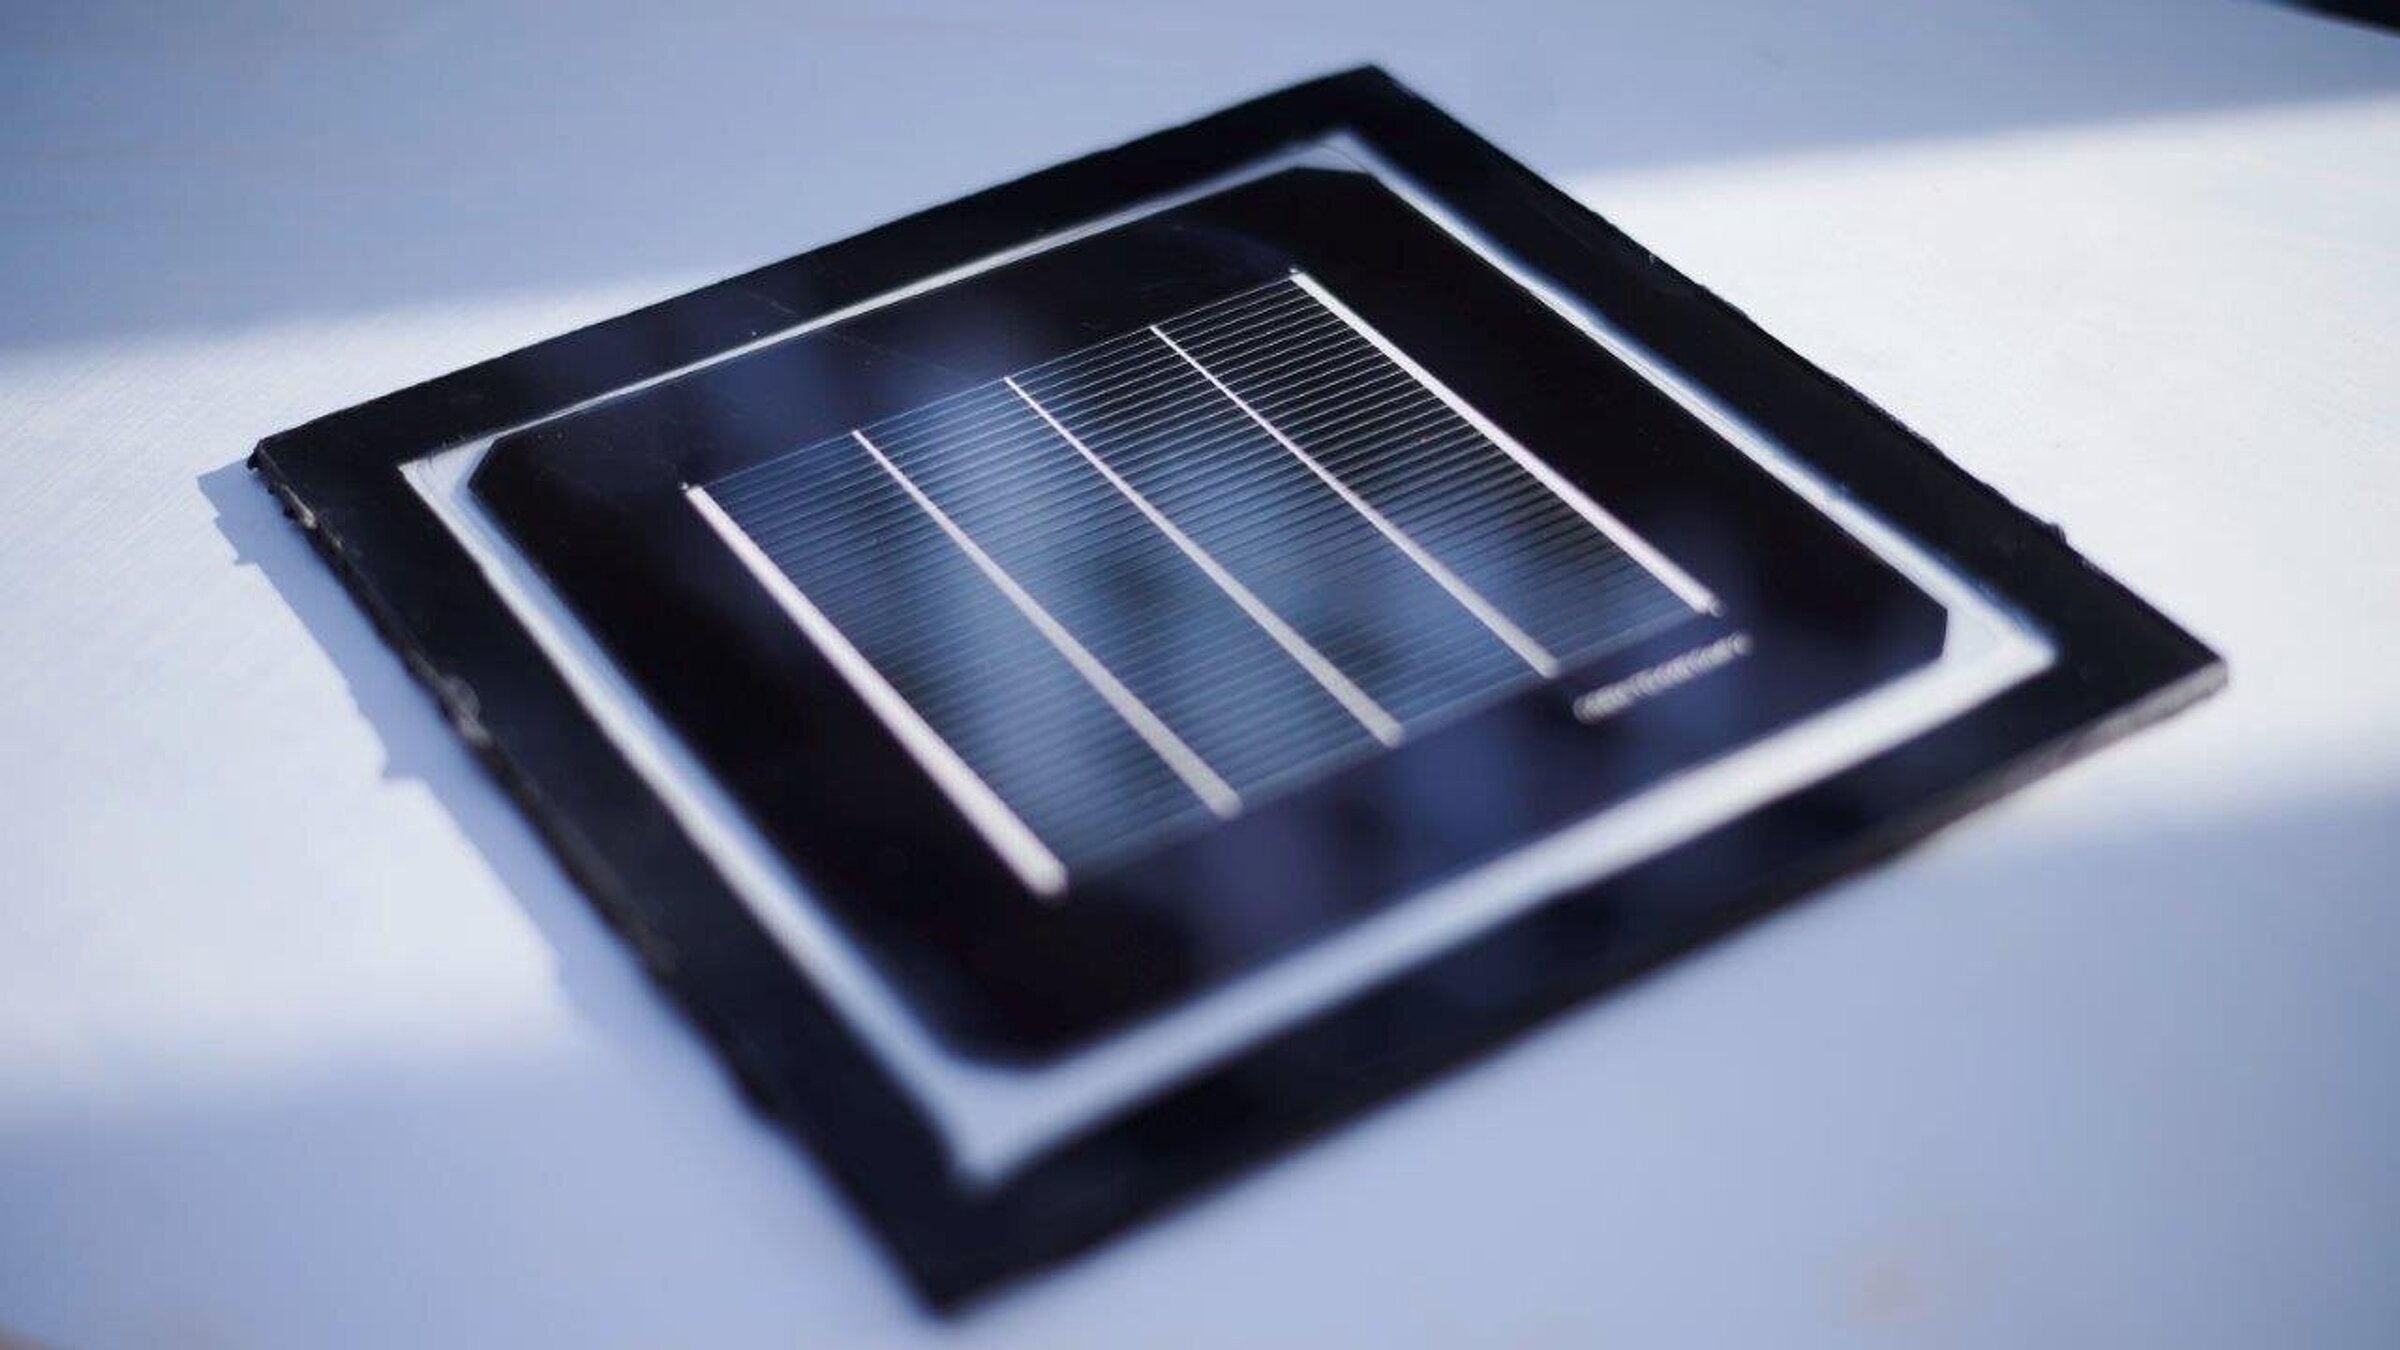 Meyer Burger establishes new partnerships for the development of high-performance solar modules with perovskite technology